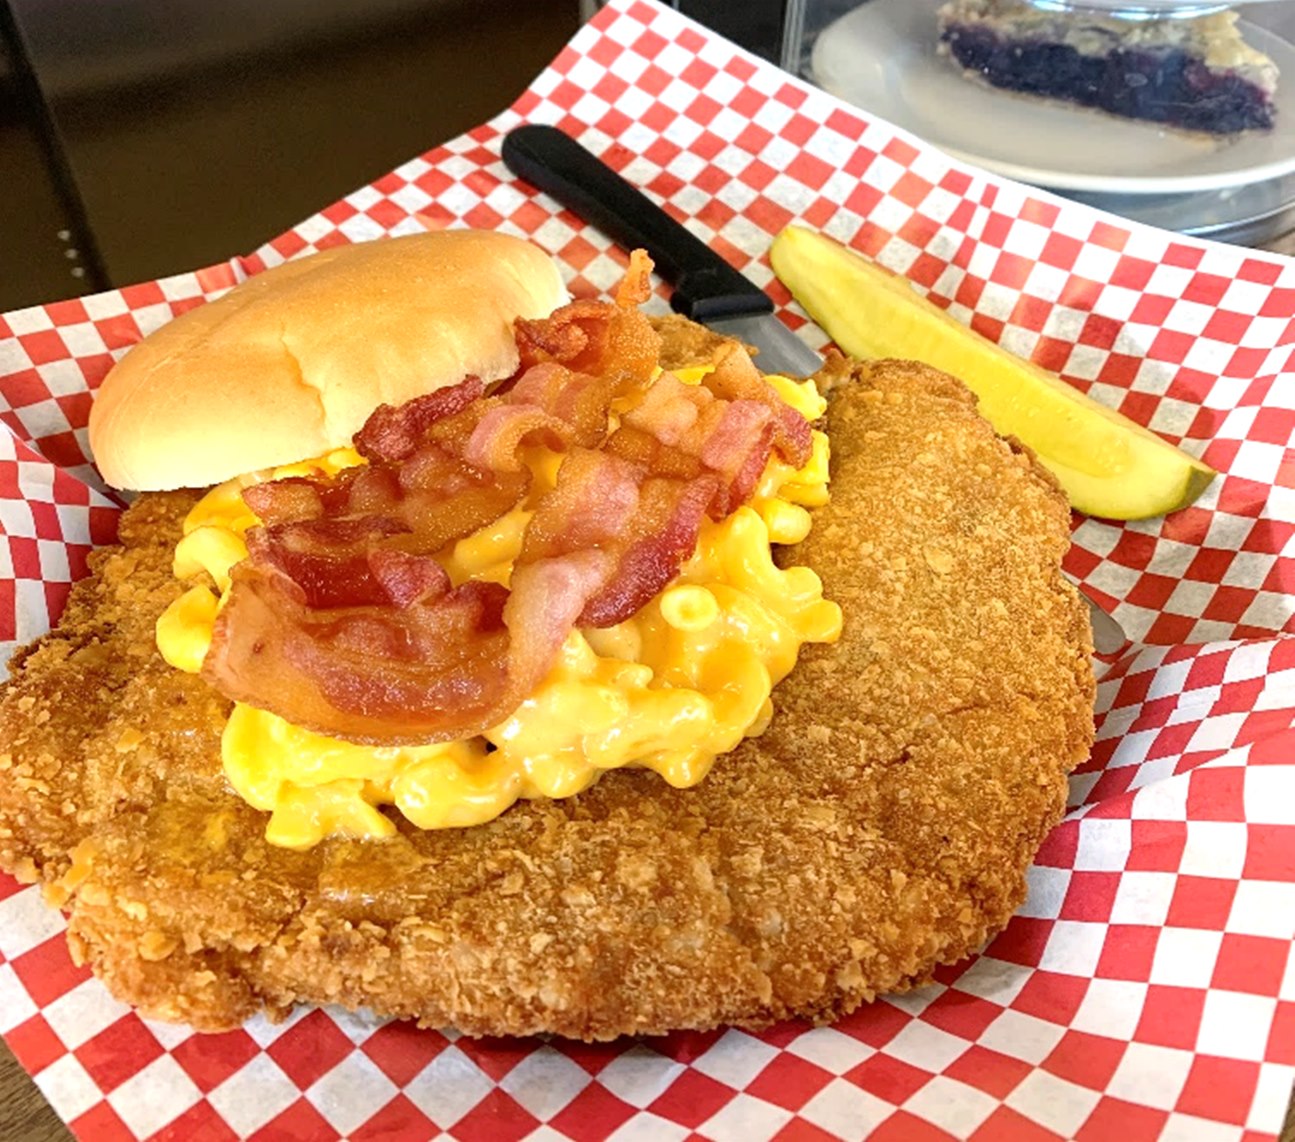 A huge fried pork tenderloin topped with mac and cheese, bacon, and a top bun, sitting in a checkerboard paper-lined basket